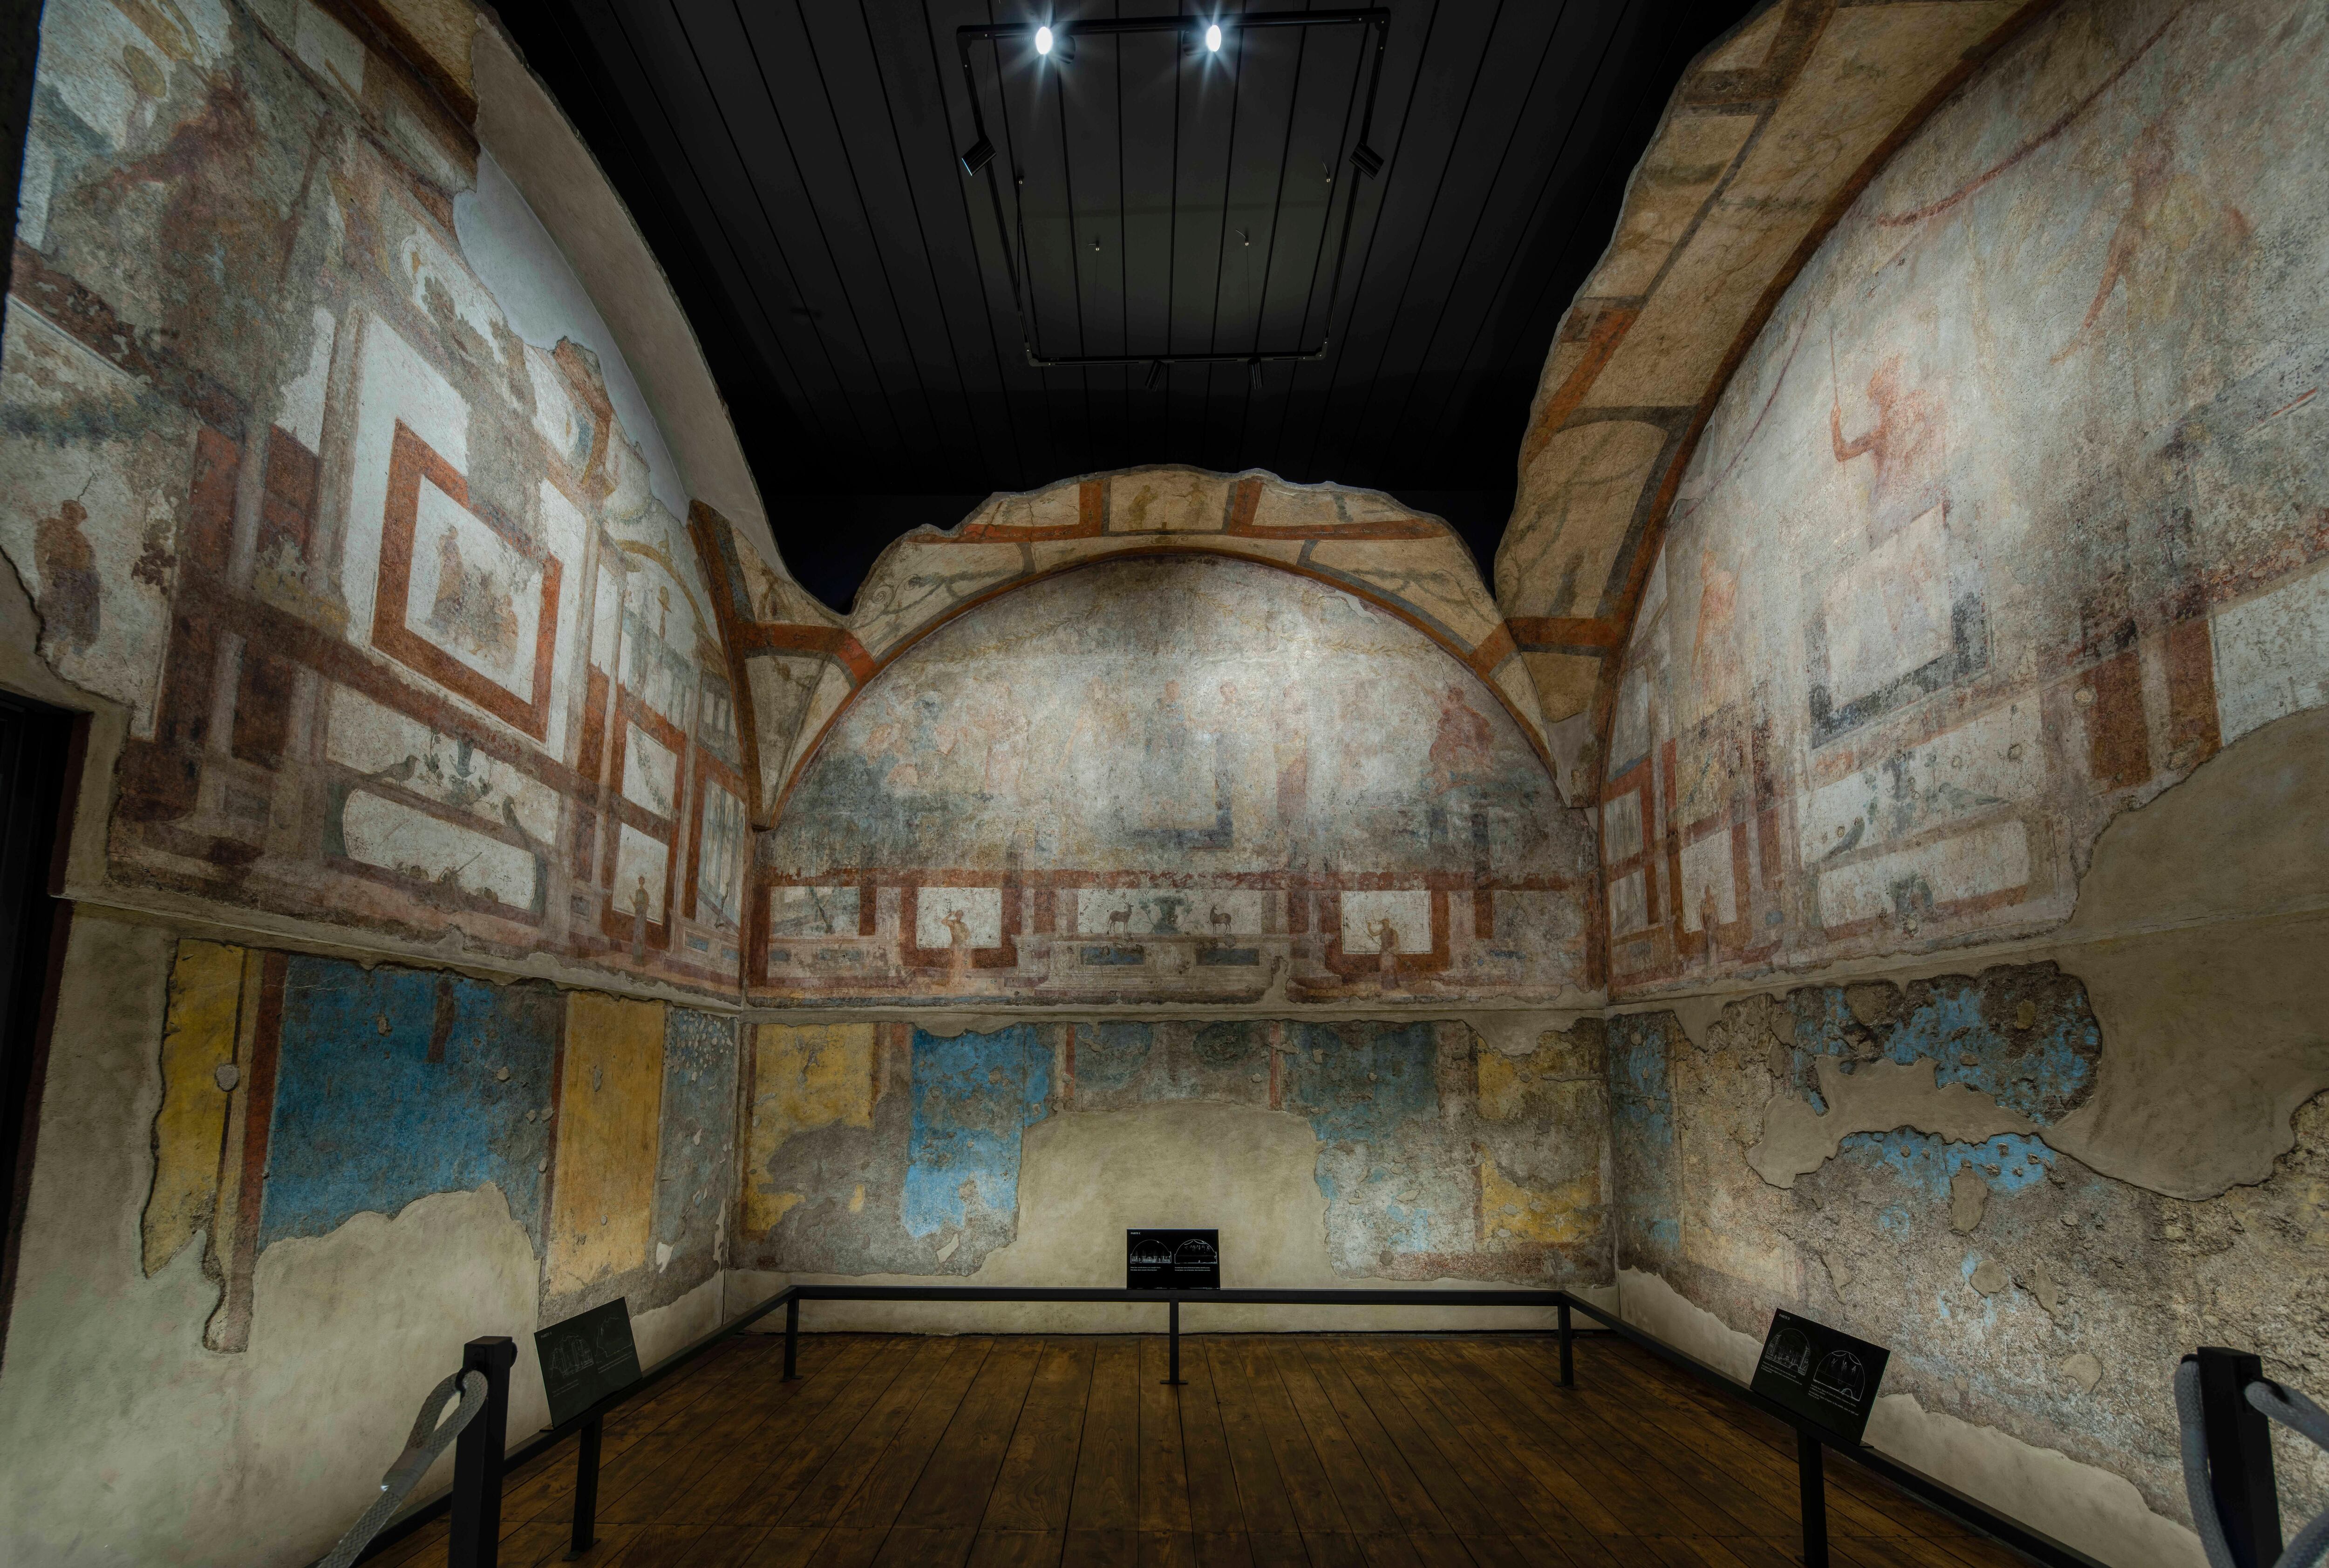 Ancient home, prayer room open at Rome’s Baths of Caracalla